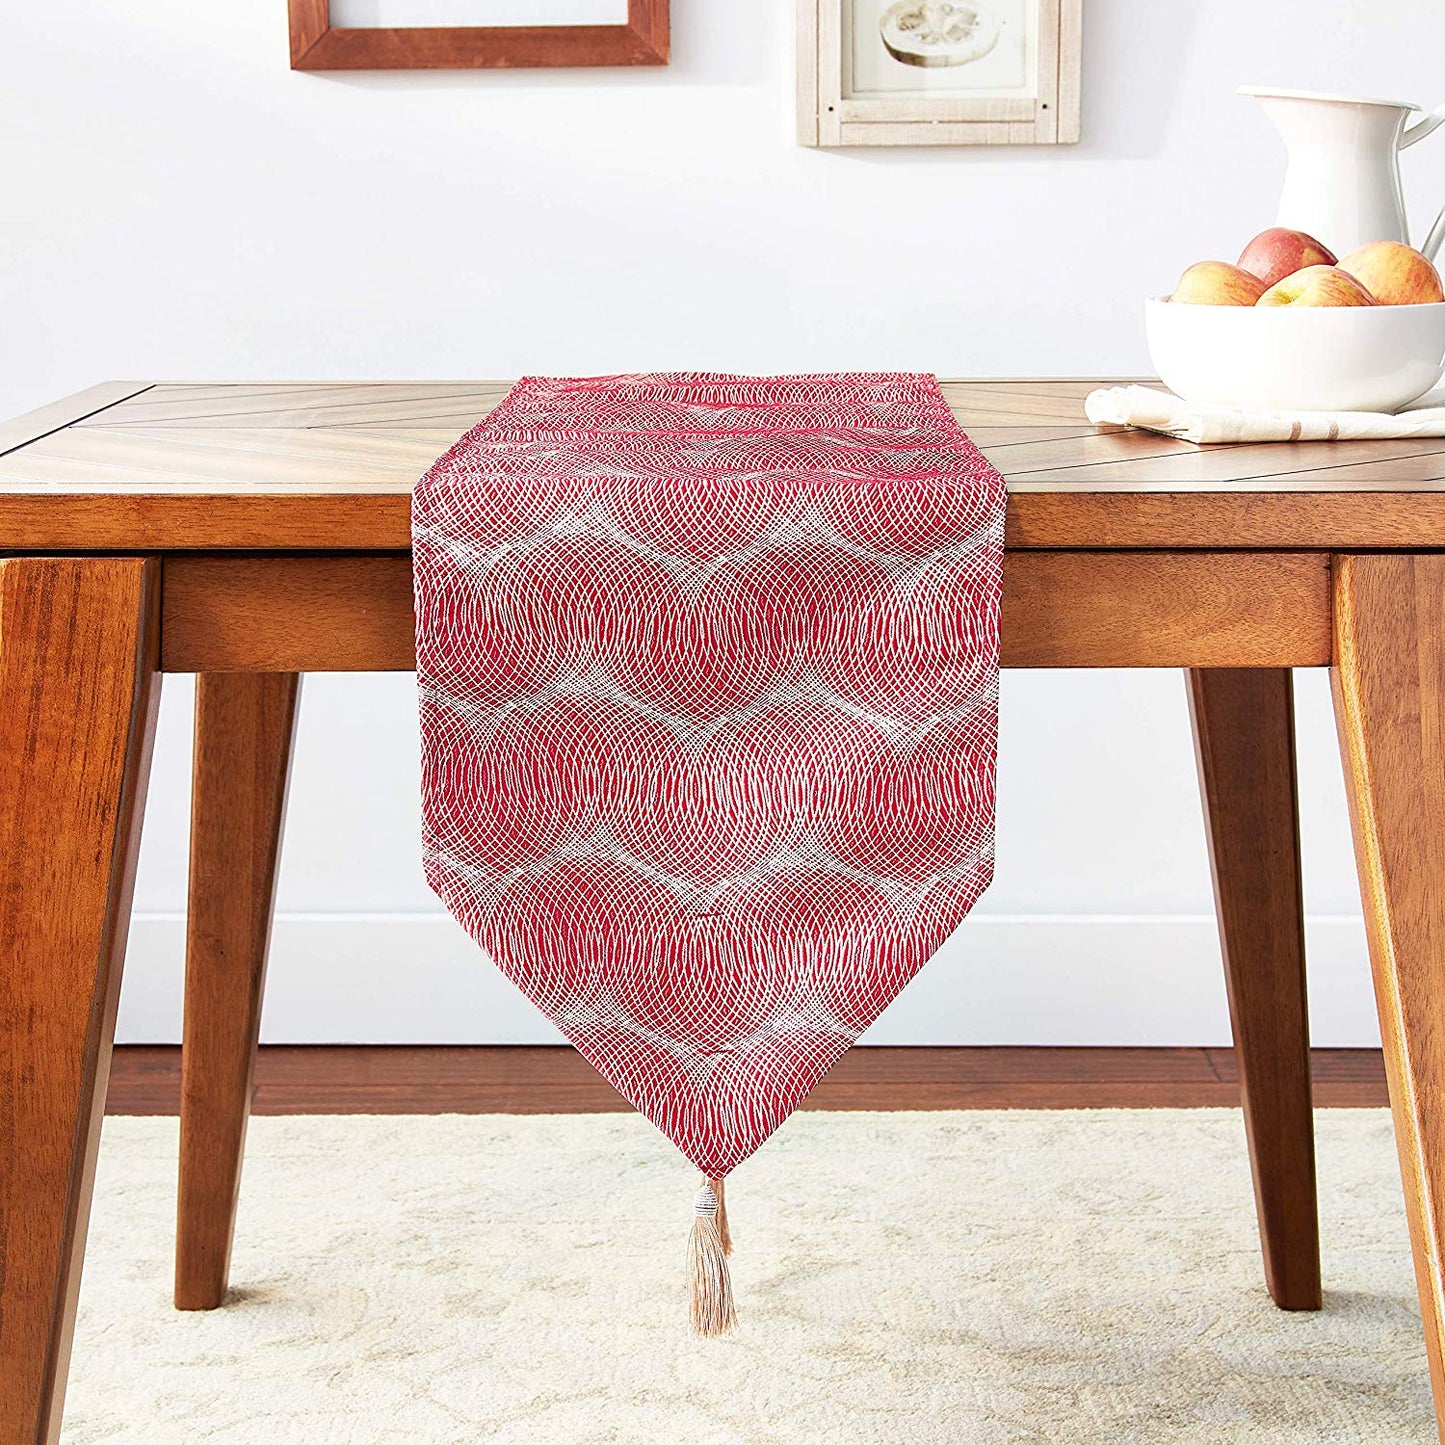 Circular Full Concentric Rings Spiral Pattern Decorative Table Runner